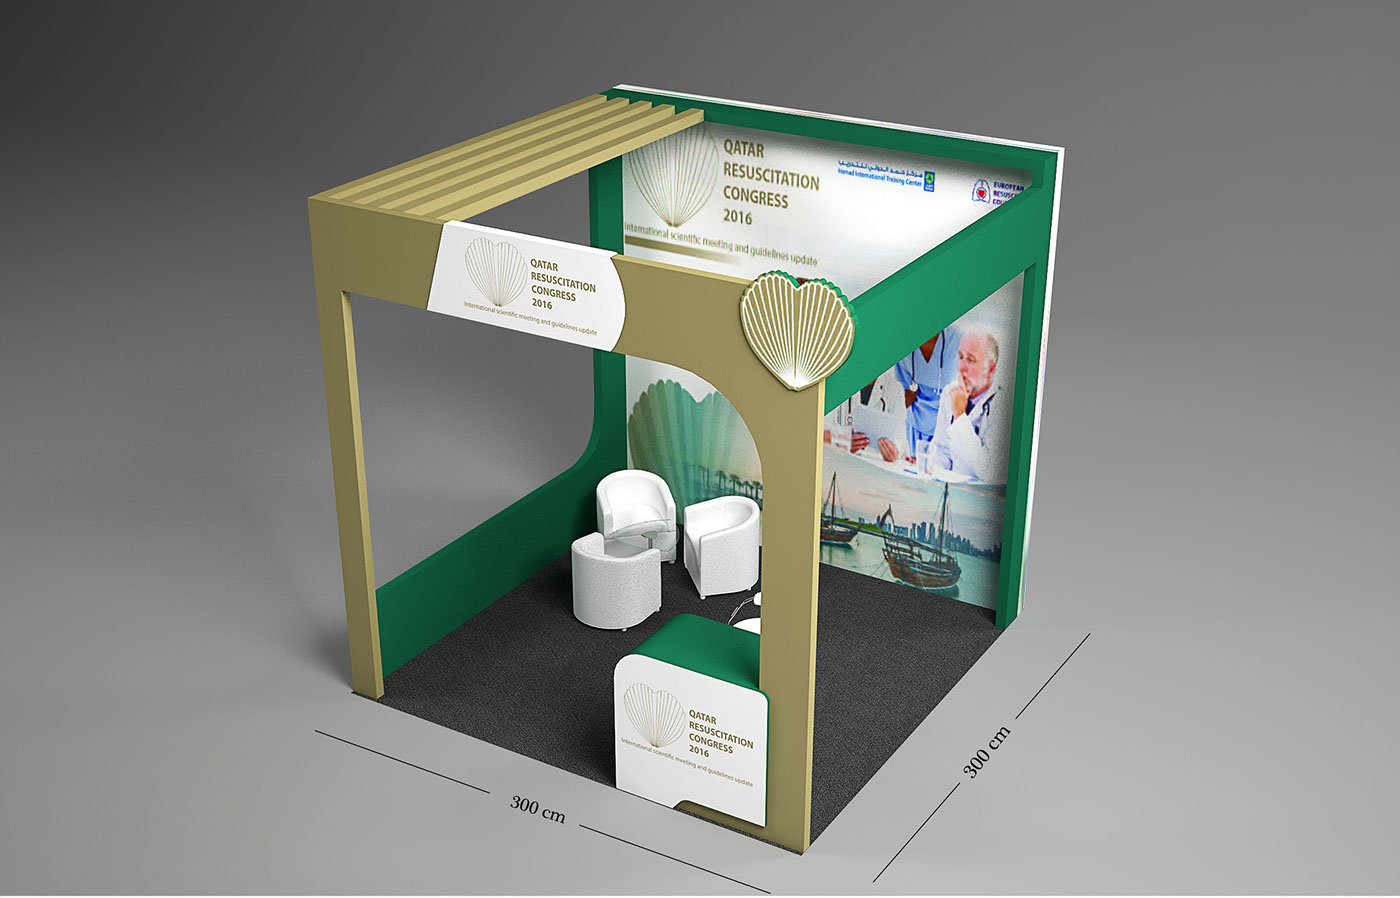 Custom Stand exhibition stand exhibitions Buisiness conference kiosks booth wooden stand